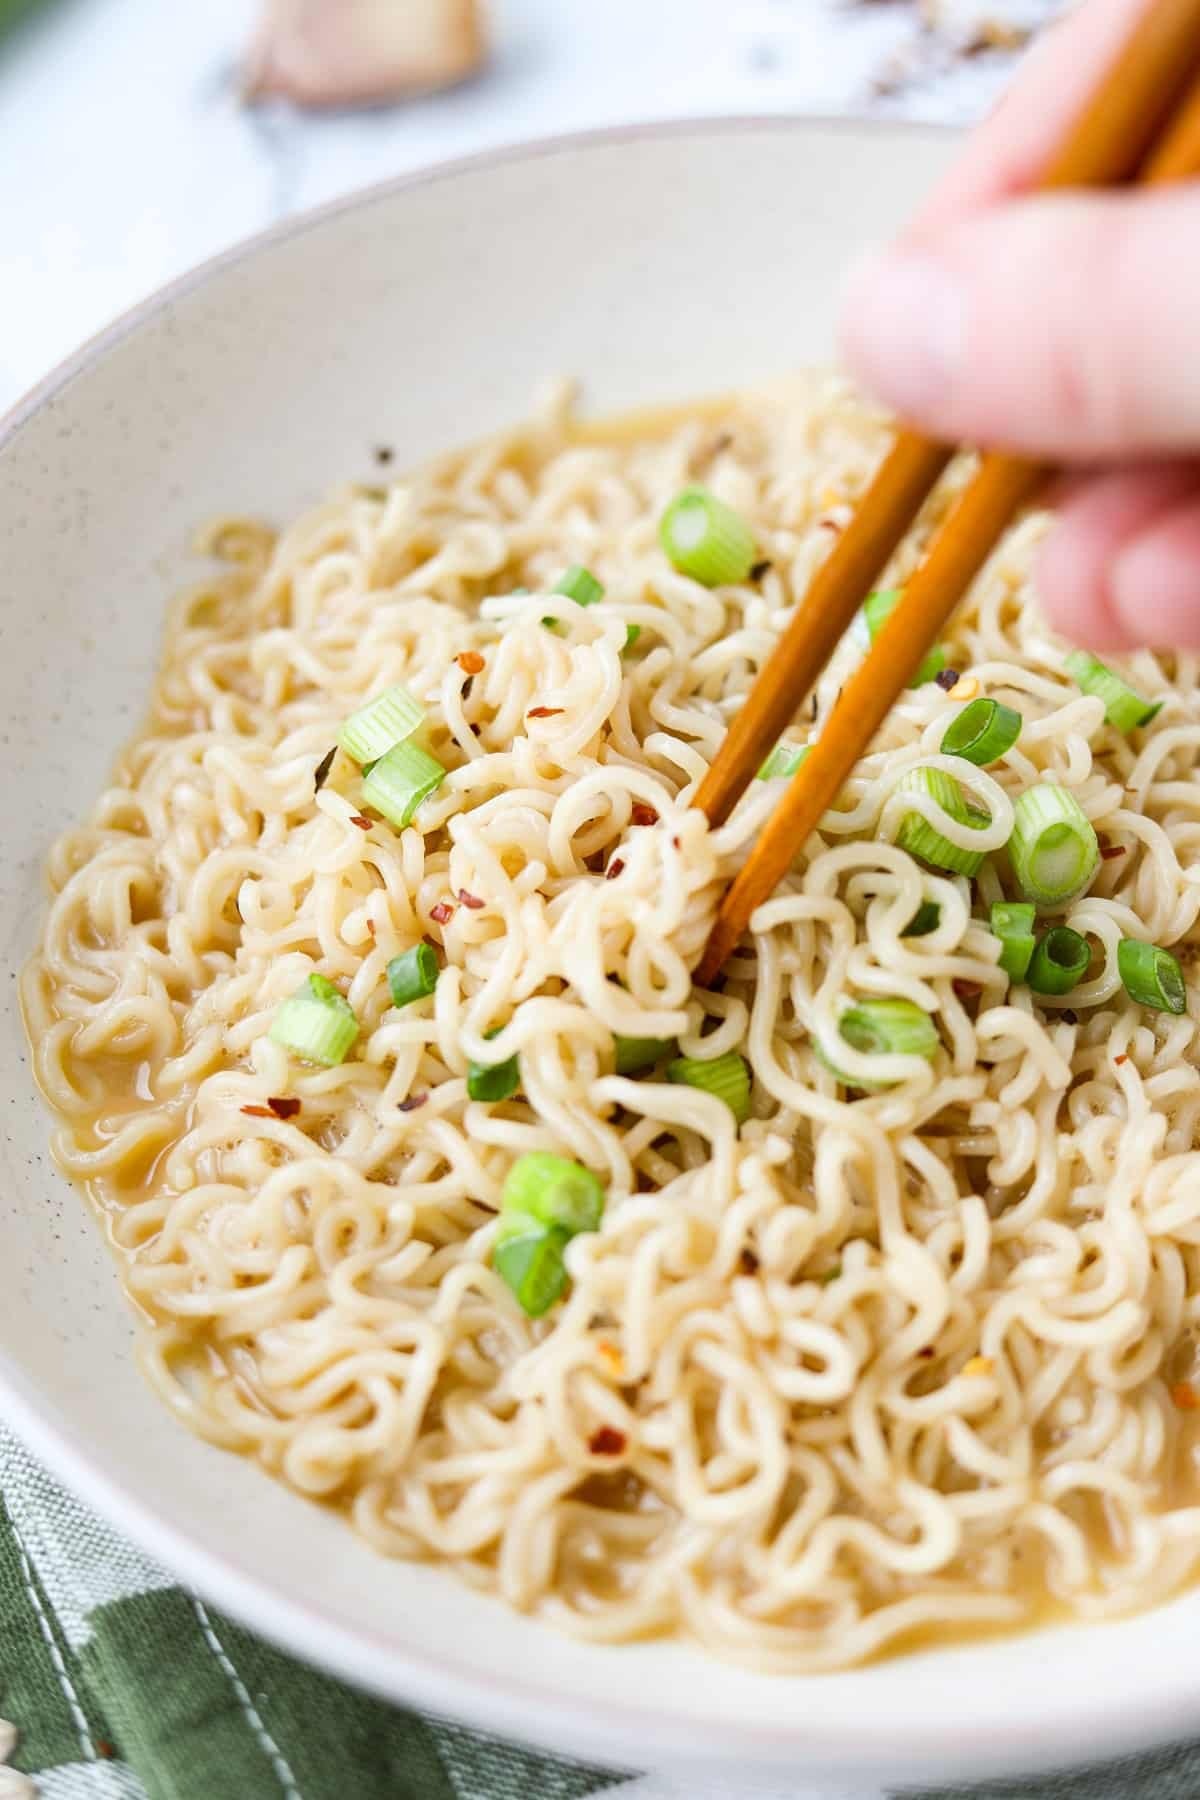 Using chopsticks to pull ramen noodles from a bowl.